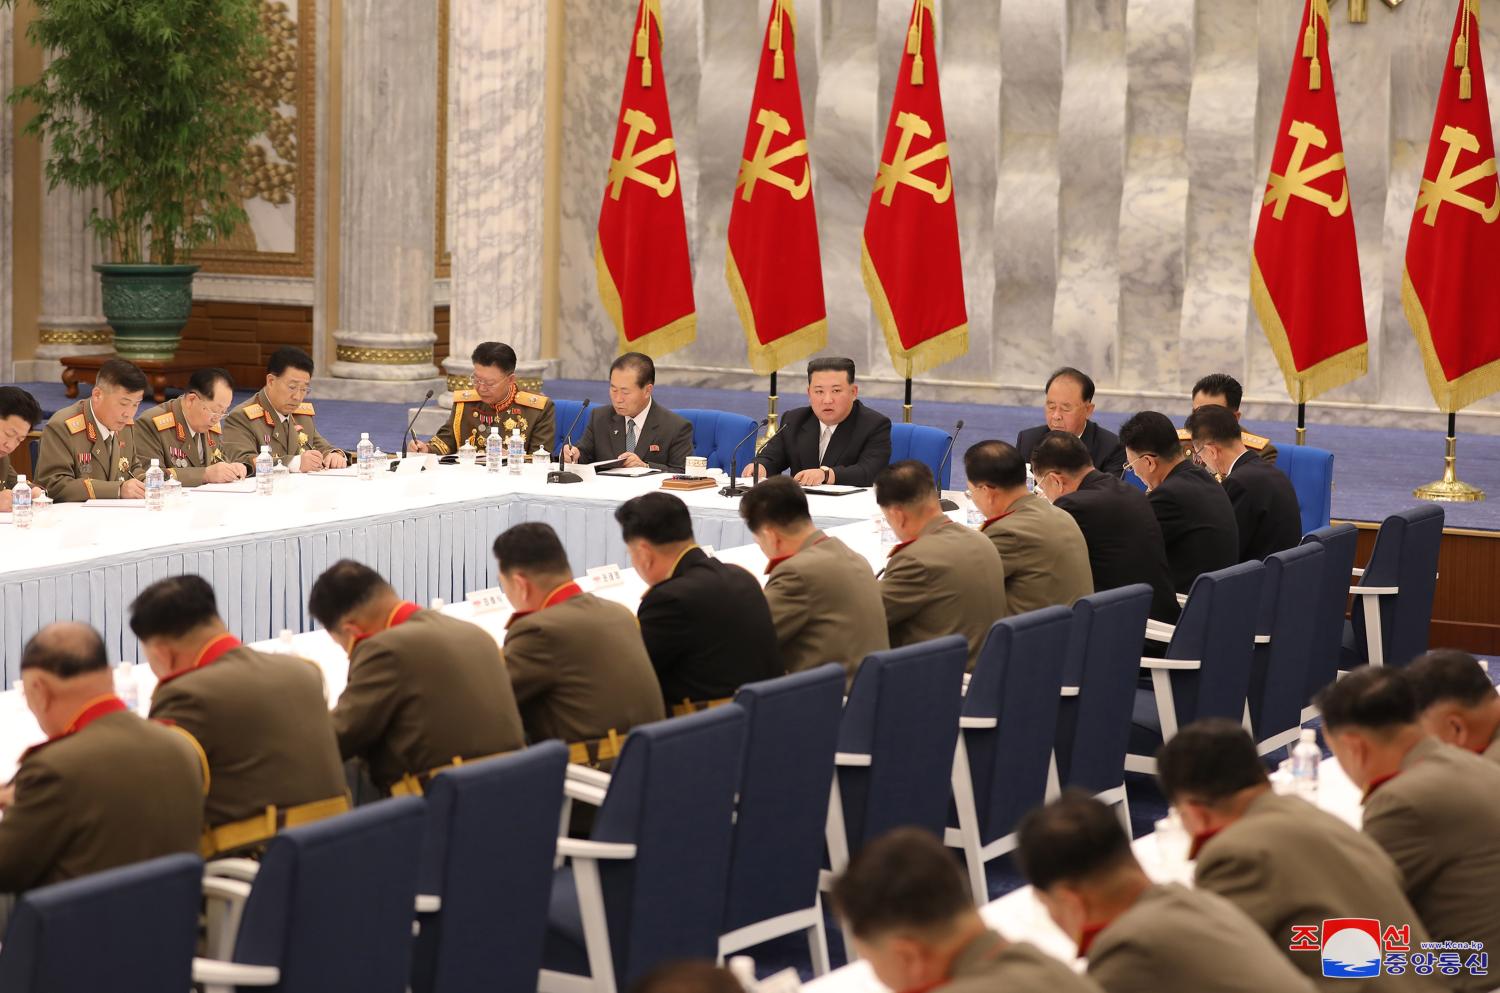 Pyongyang, North Korea.- The photo, published on June 24, 2022, by the North Korean Central News Agency (KCNA), shows the chairman of the North Korean State Affairs Committee, Kim Jong-un presiding over the third day of the third enlarged meeting of the eighth Central Military Commission of the ruling Workers' Party (WPK), held the day before, in Pyongyang. North Korea has approved an "important issue" to strengthen its "war deterrence" during a key party session discussing major policies and defense strategies this week, the KCNA reported.